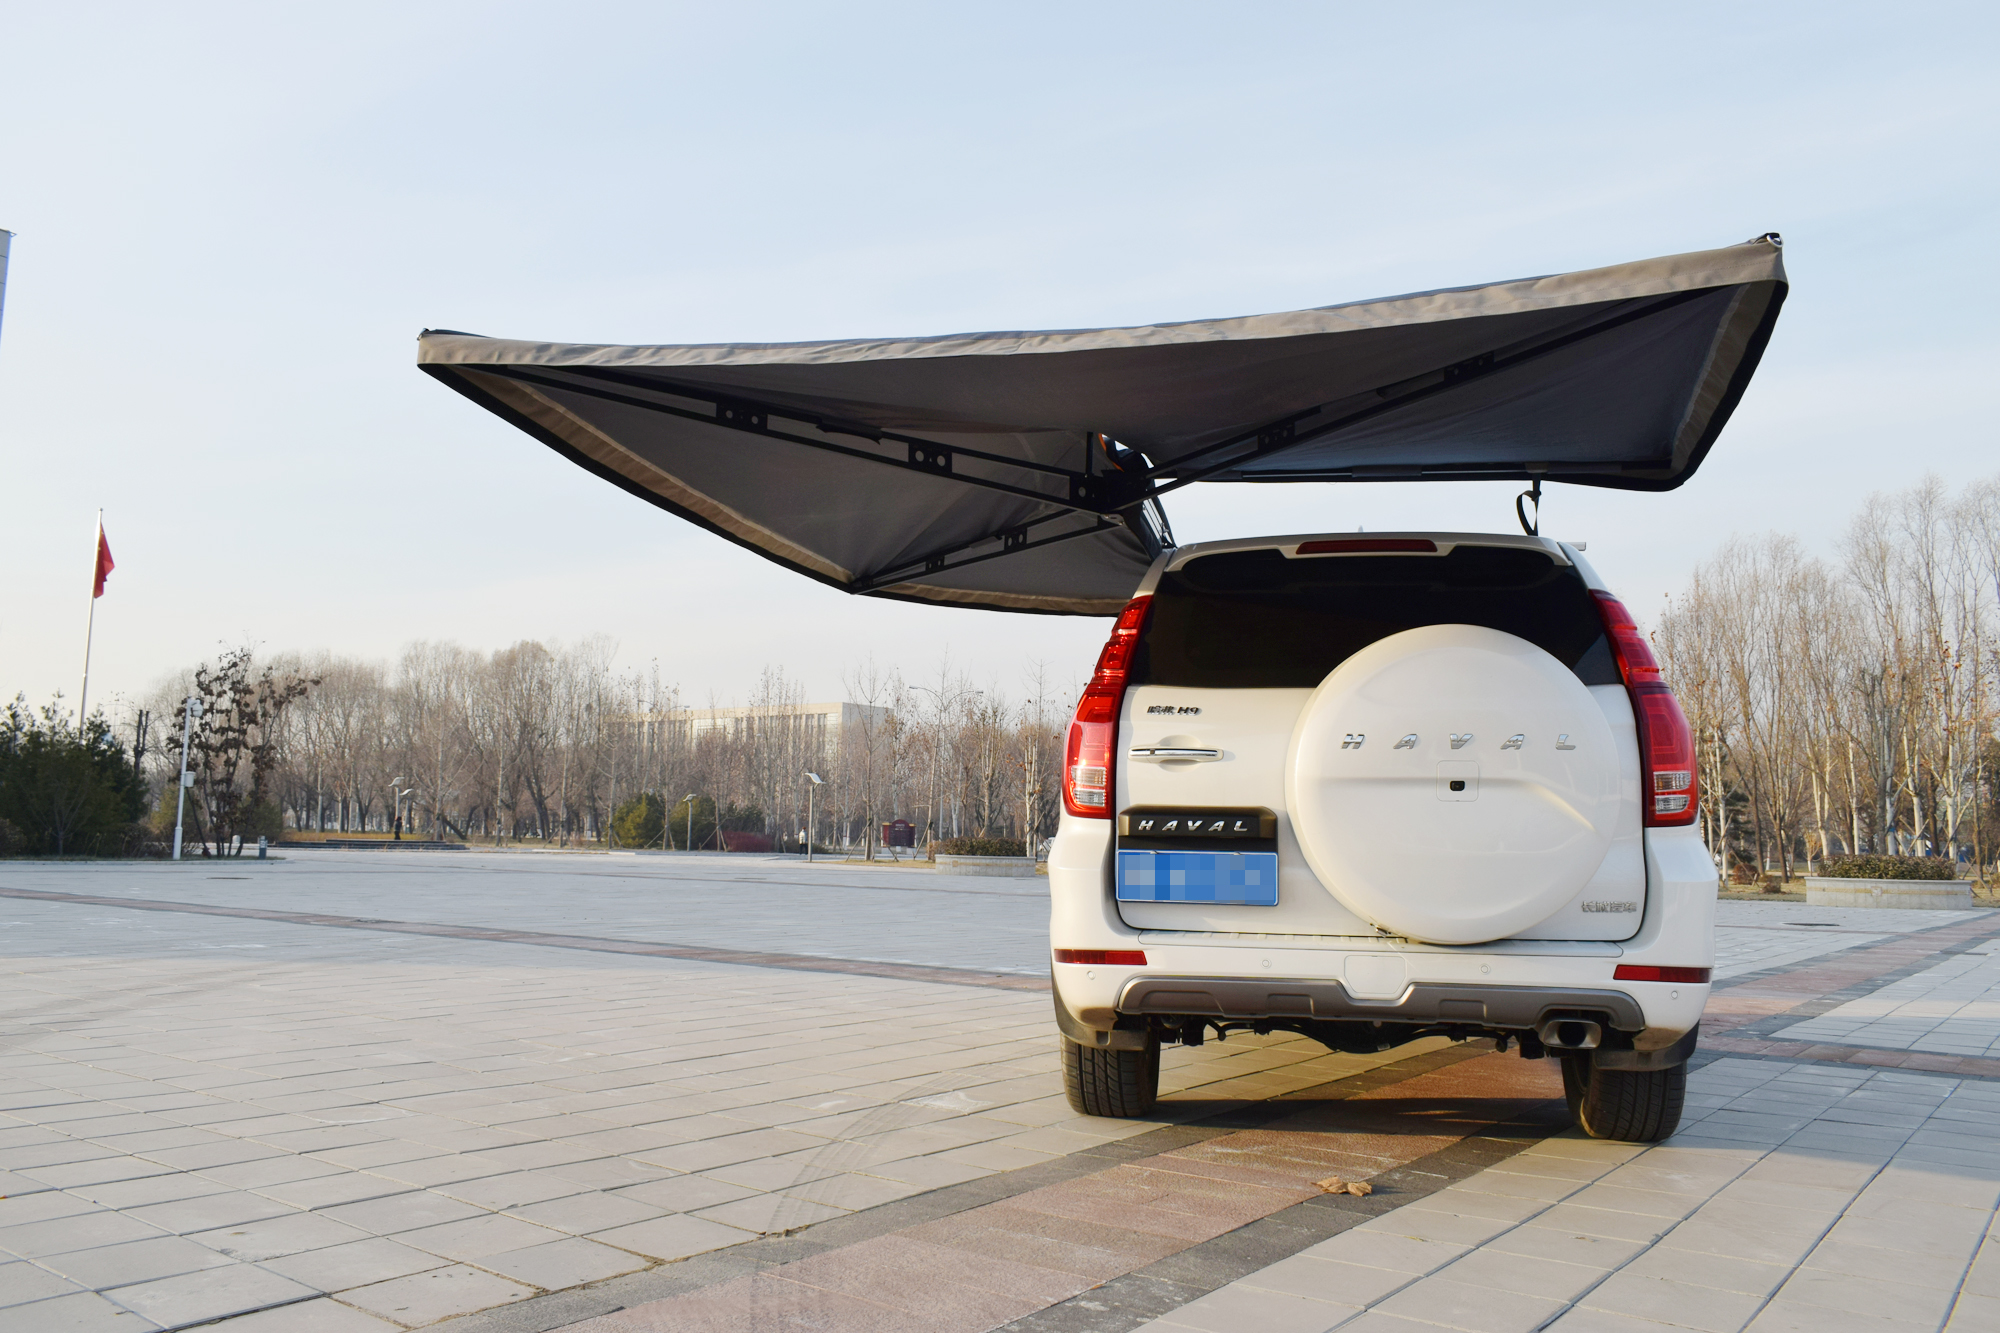 What Makes An Vehicle Awning?